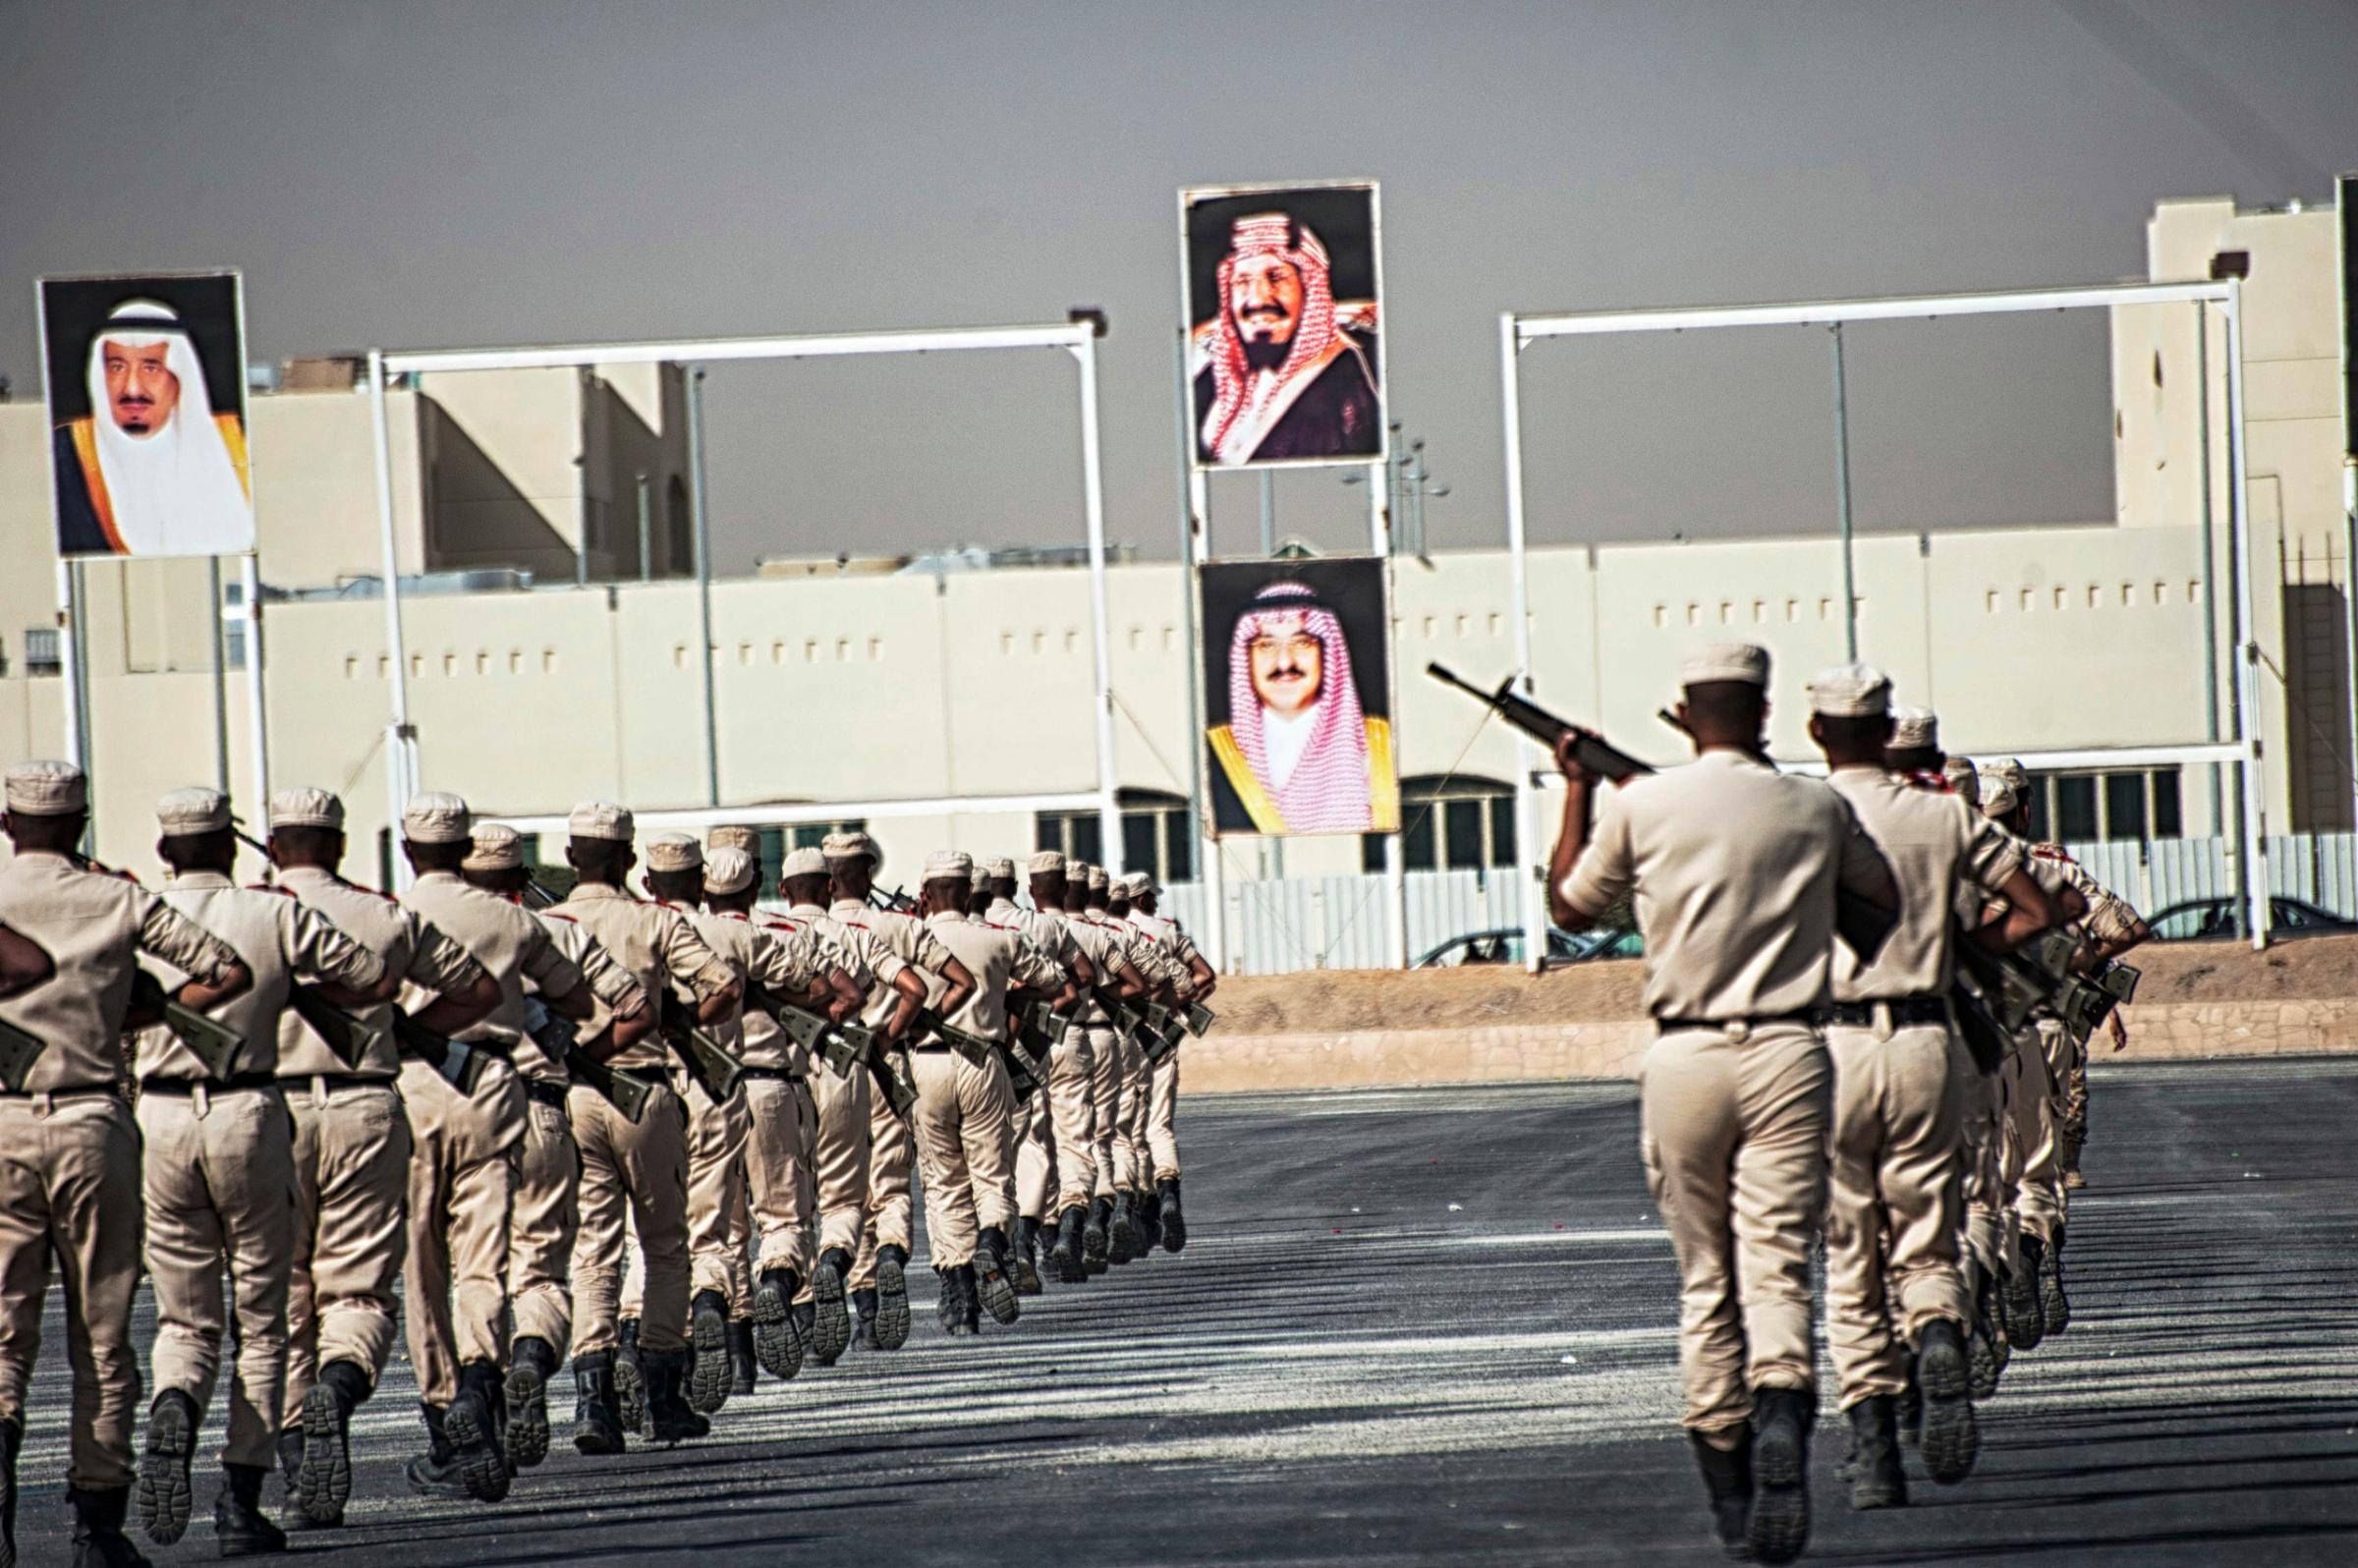 Troops with the Saudi Special Security Forces perform a show of force below images of the Royal family, from left: King Salman bin AbdulAziz, King AbdulAziz, Prince Mohammed bin Nayef, at the Counter-Terrorism Training School camp under the Ministry of Interior in Riyadh, Saudi Arabia, March 5, 2013.  The Saudi government has been fighting terrorism within the Kingdom for decades, and has roughly 3,000 SEF in Riyadh, alone.  Despite a fraugh relationship with the United States in the past, Saudi Arabia and the U.S. have routinely shared security information in order to prevent and fight terrorism.  With the recent death of HRH King Abdullah, the international community is looking to the newly appointed HRH King Salman to see how he develop the Kingdom's relationship with the West.  (Credit: Lynsey Addario/ Getty Reportage)